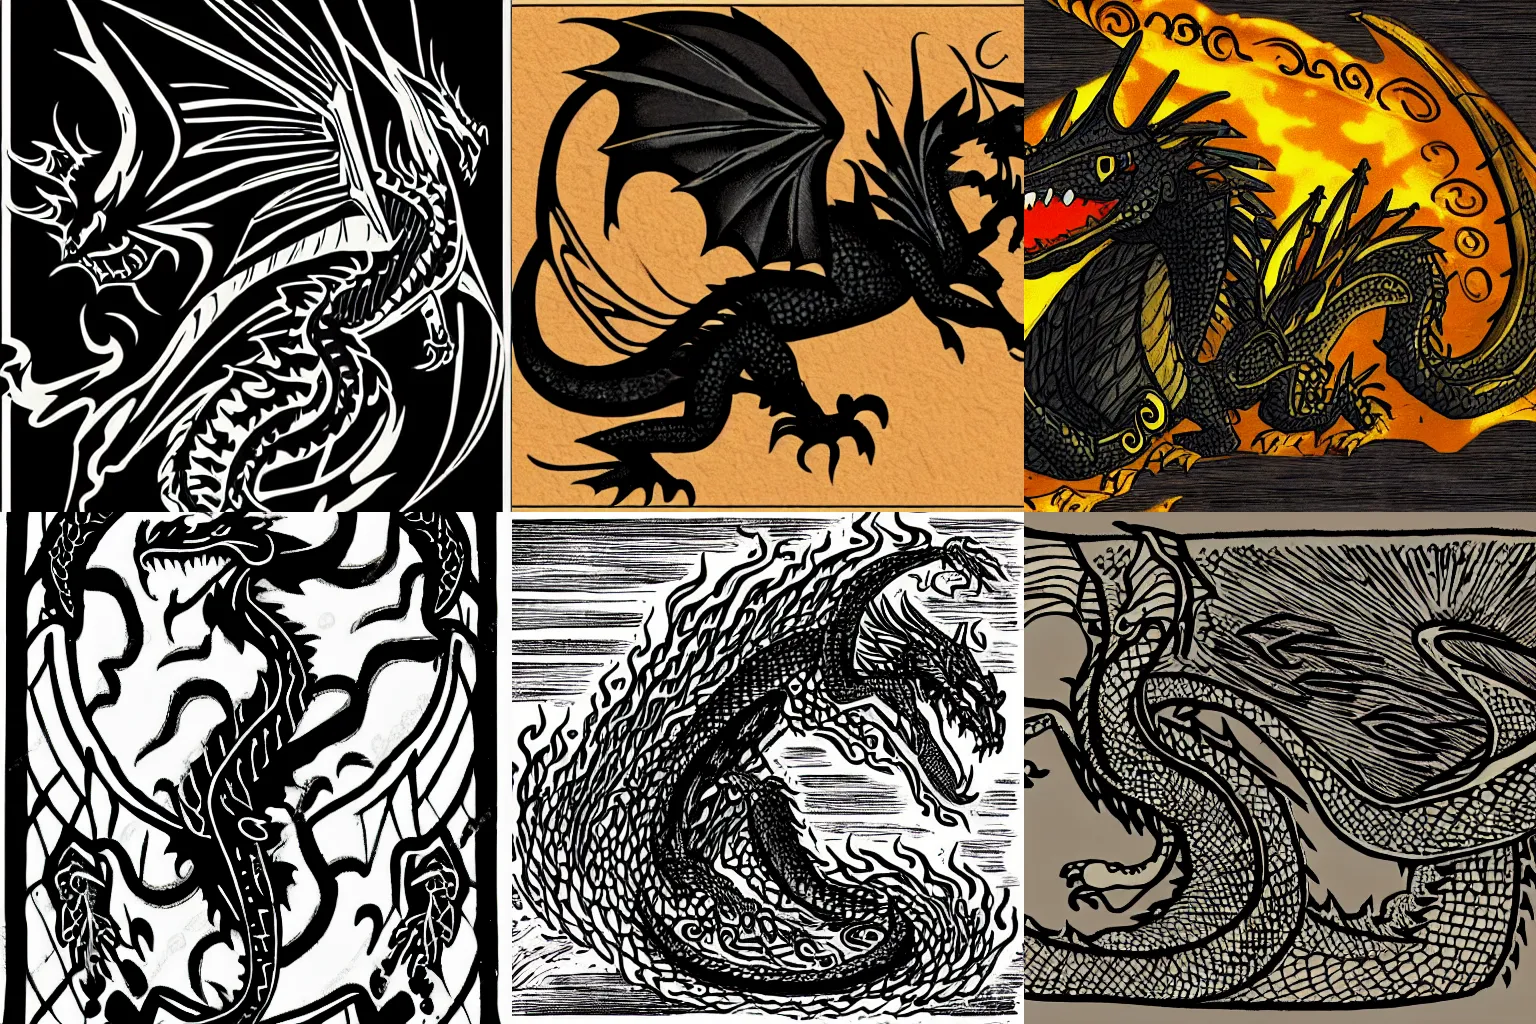 Prompt: A black fire breathing dragon, medieval city, graphical art